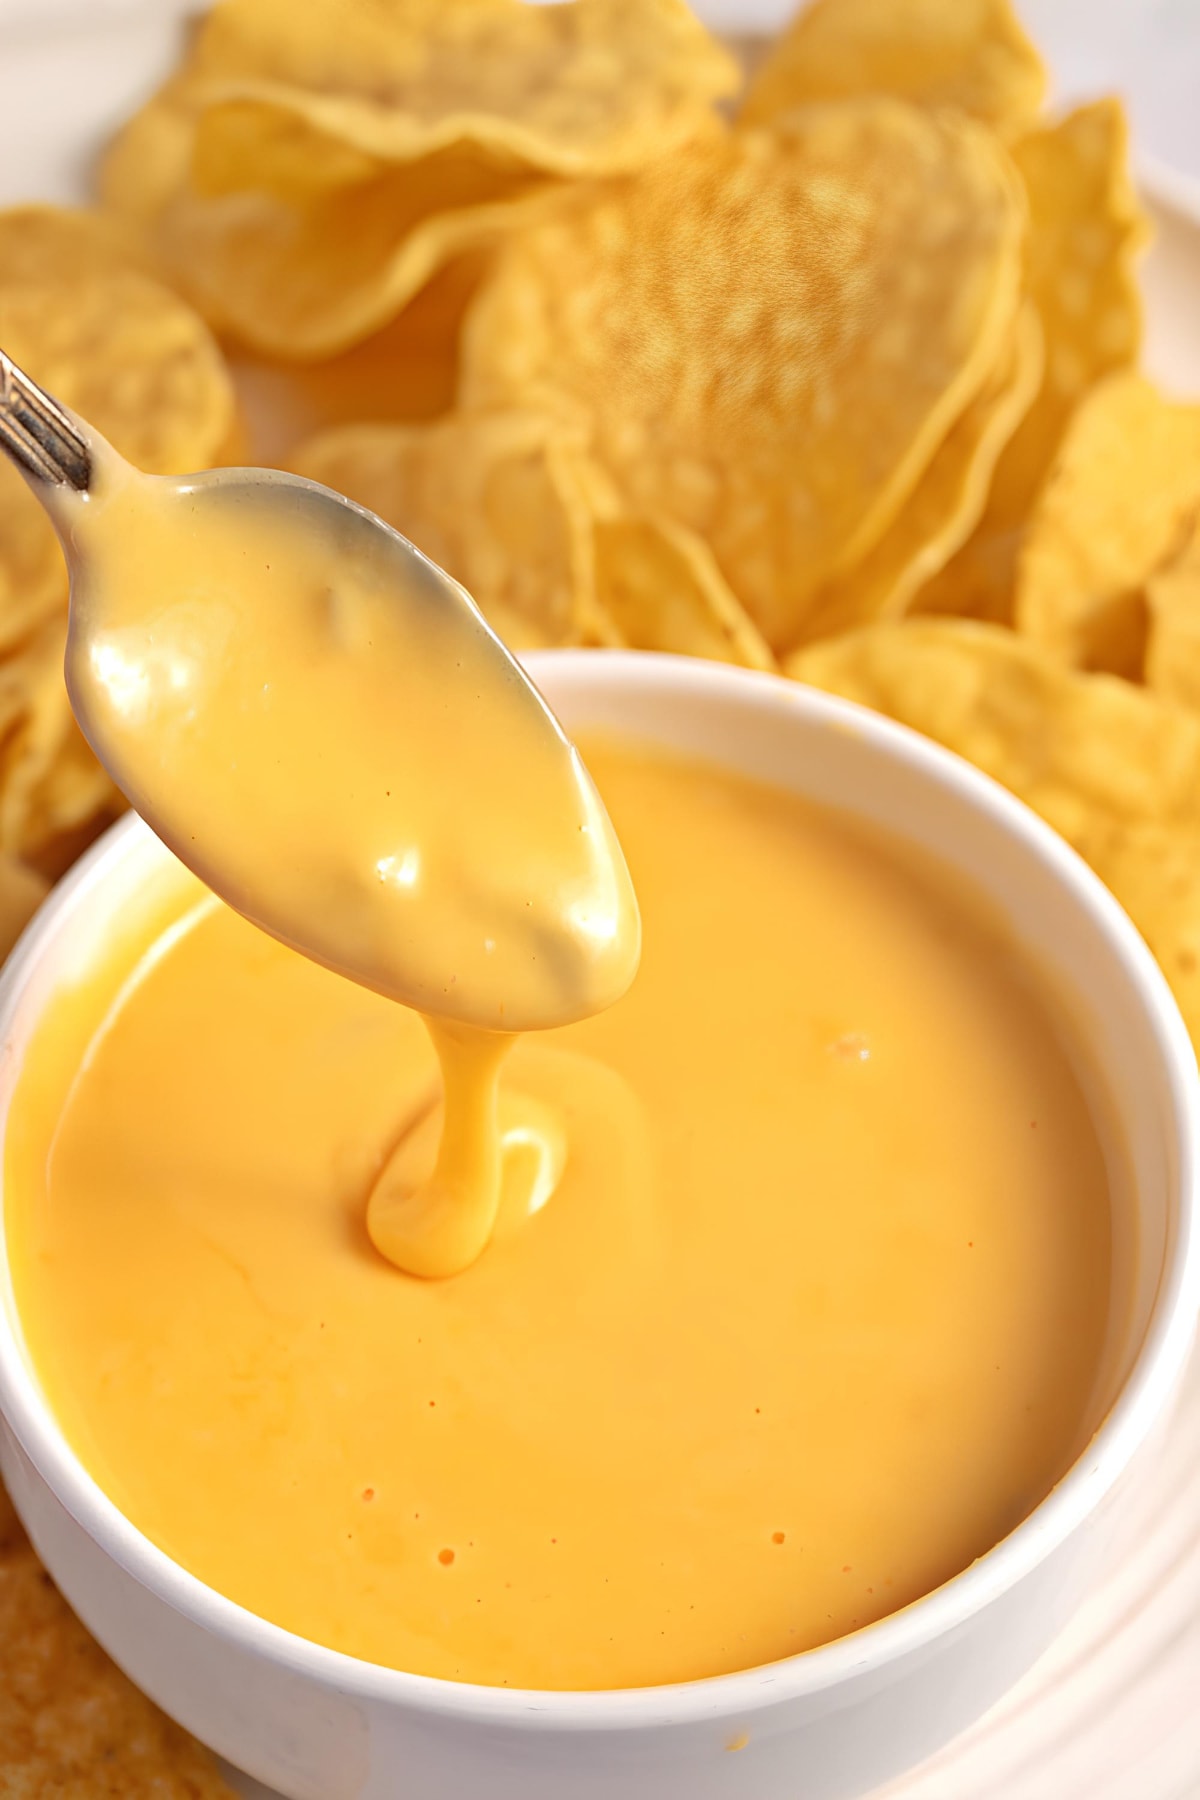 A creamy and savory nacho cheese sauce in a bowl with chips